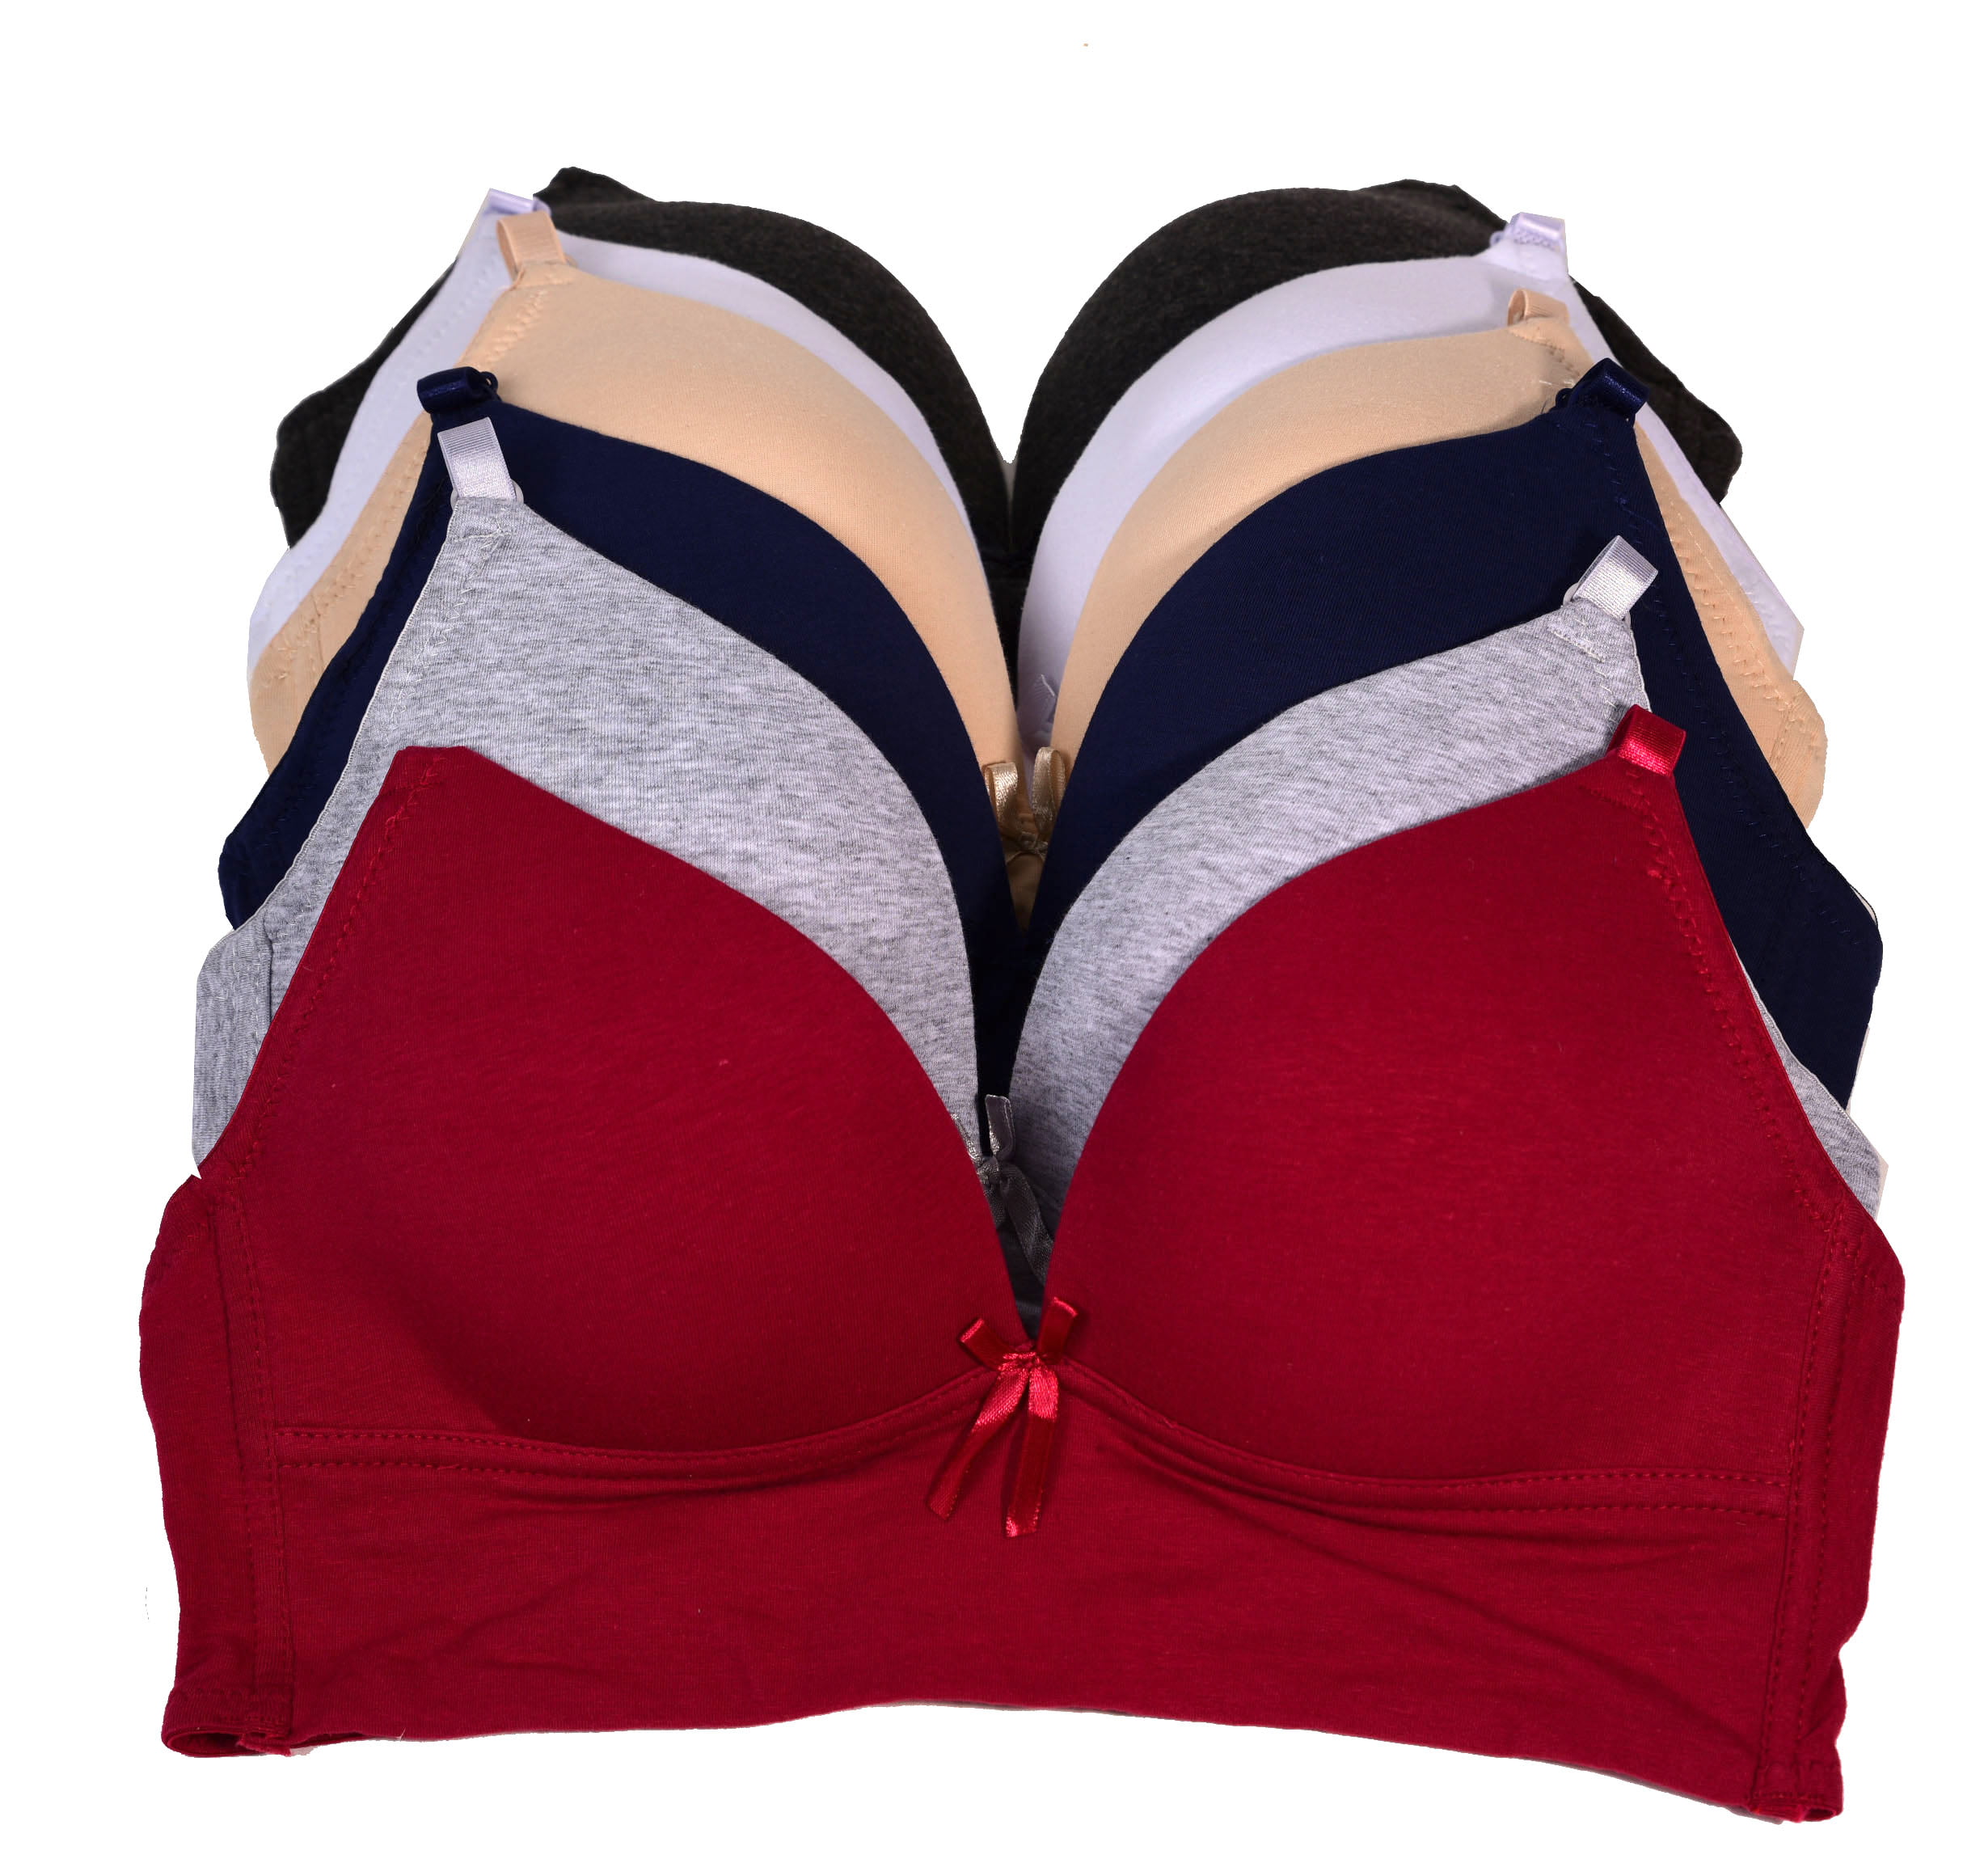 Details about   Fruit of the Loom Seamless Pullover Bra with Built-in Cups Bra 